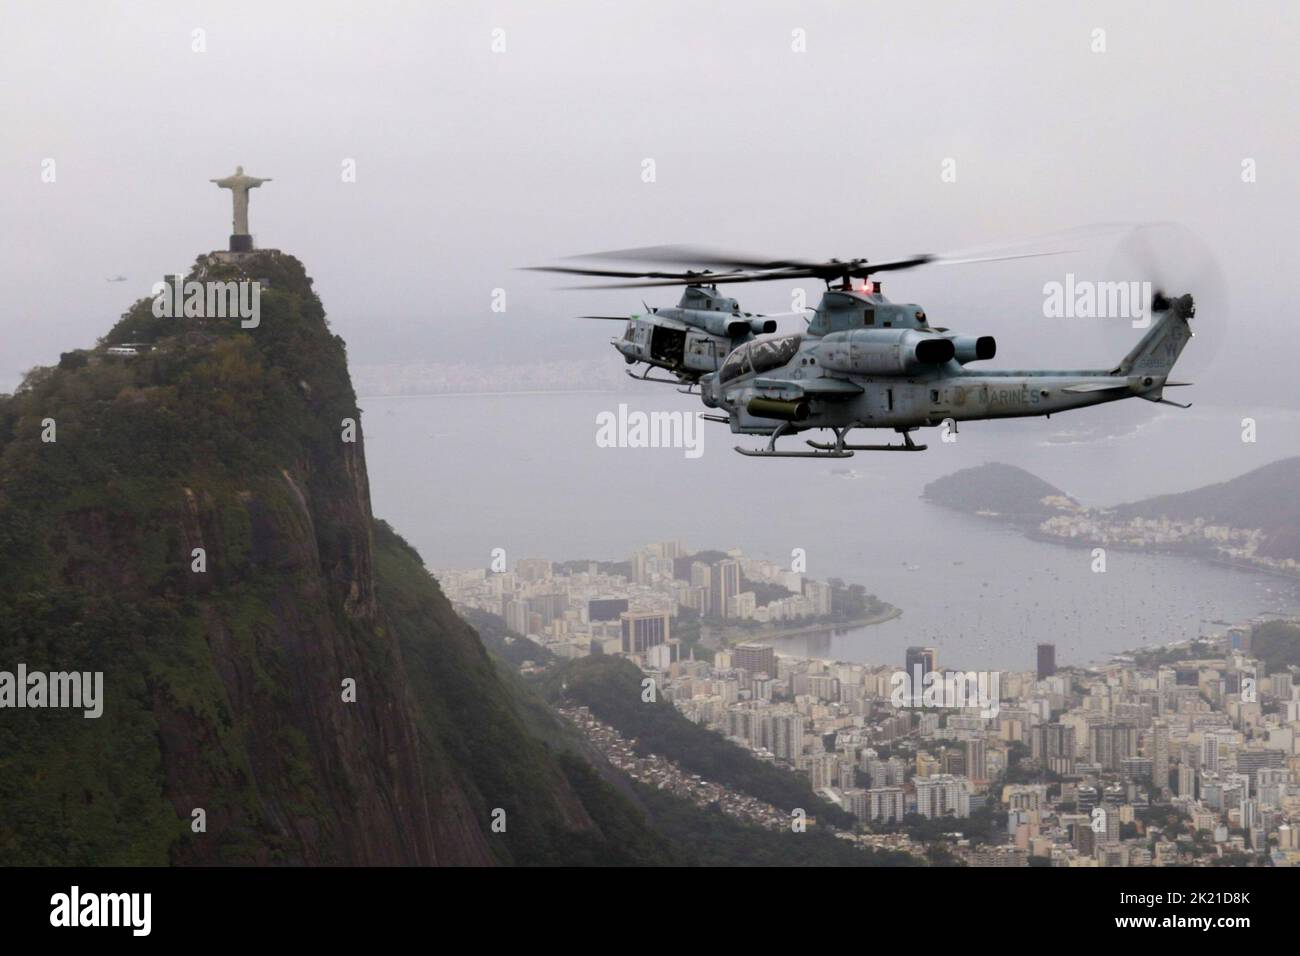 Rio de Janeiro, Brazil. 12th Sep, 2022. U.S. Marines with Marine Light Attack Helicopter Squadron (HMLA) 773, 4th Marine Aircraft Wing, Marine Forces Reserve in support of Special Purpose Marine Air-Ground Task Force UNITAS LXIII, conduct flight operations near the Christ the Redeemer statue at Corcovado Mountain, Rio de Janeiro, during exercise UNITAS LXIII, Septembert. 12, 2022. UNITAS, which is Latin for unity was conceived in 1959 and has taken place annually since first conducted in 1960. This year marks the 63rd iteration of the worlds longest-running annual multinational maritime Stock Photo